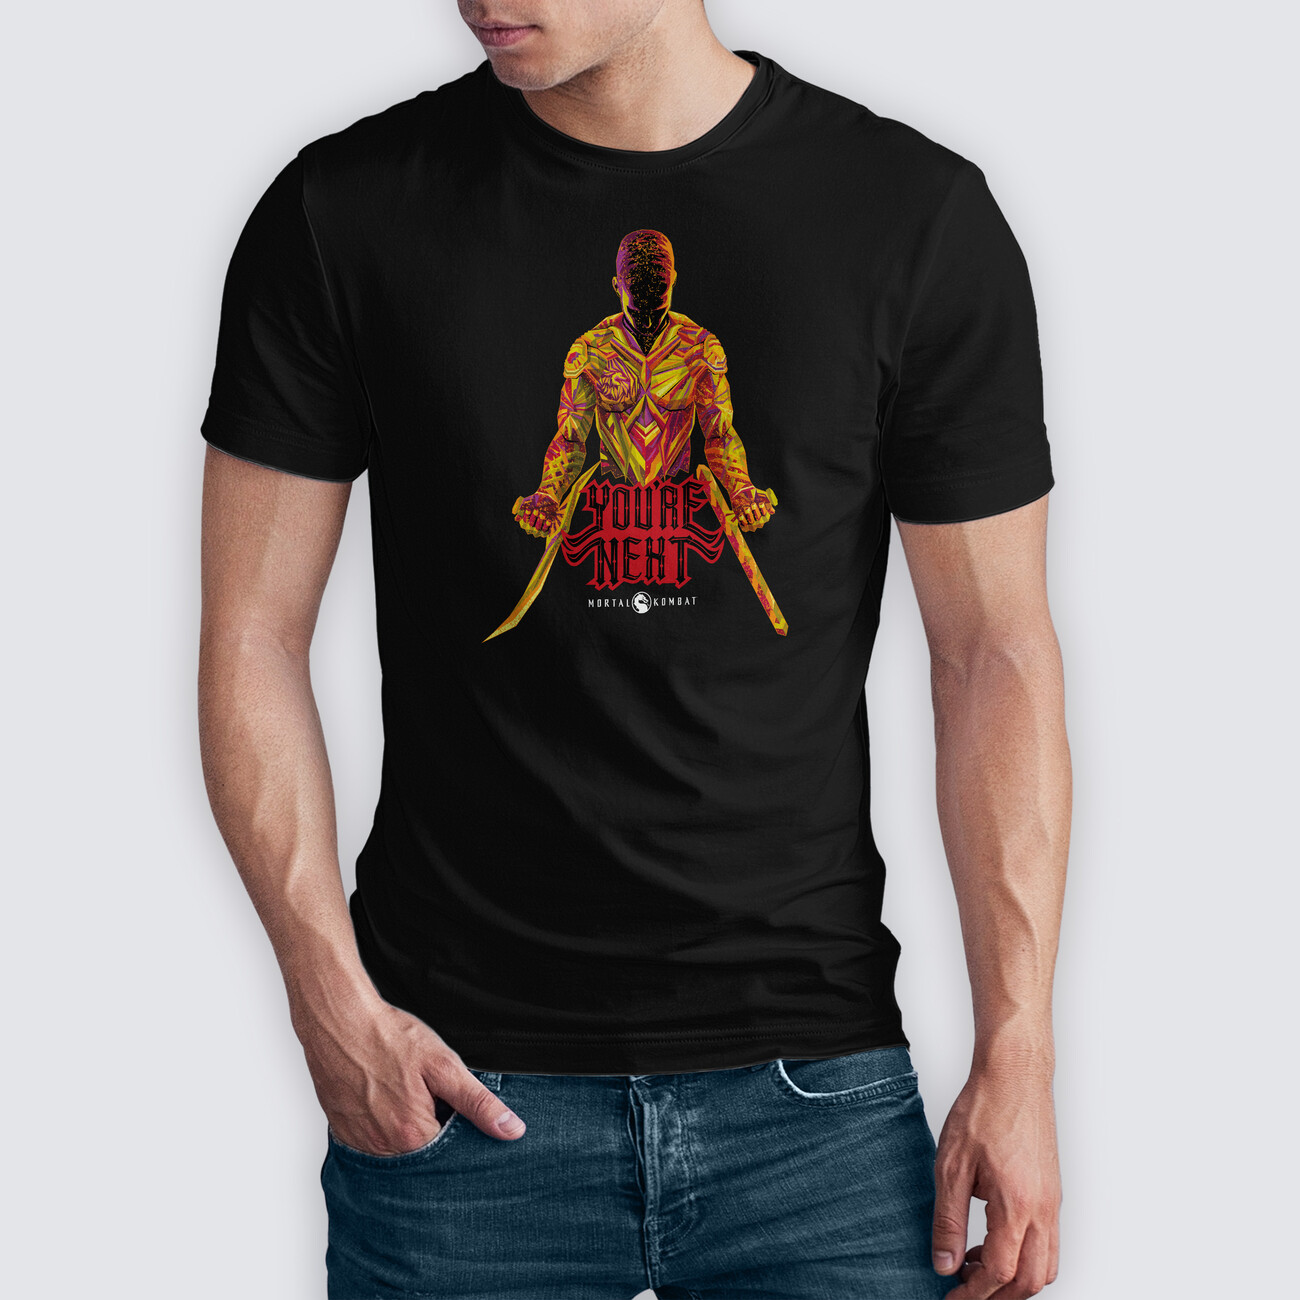 Mortal Kombat Finish Him Clothes And Accessories For Merchandise Fans